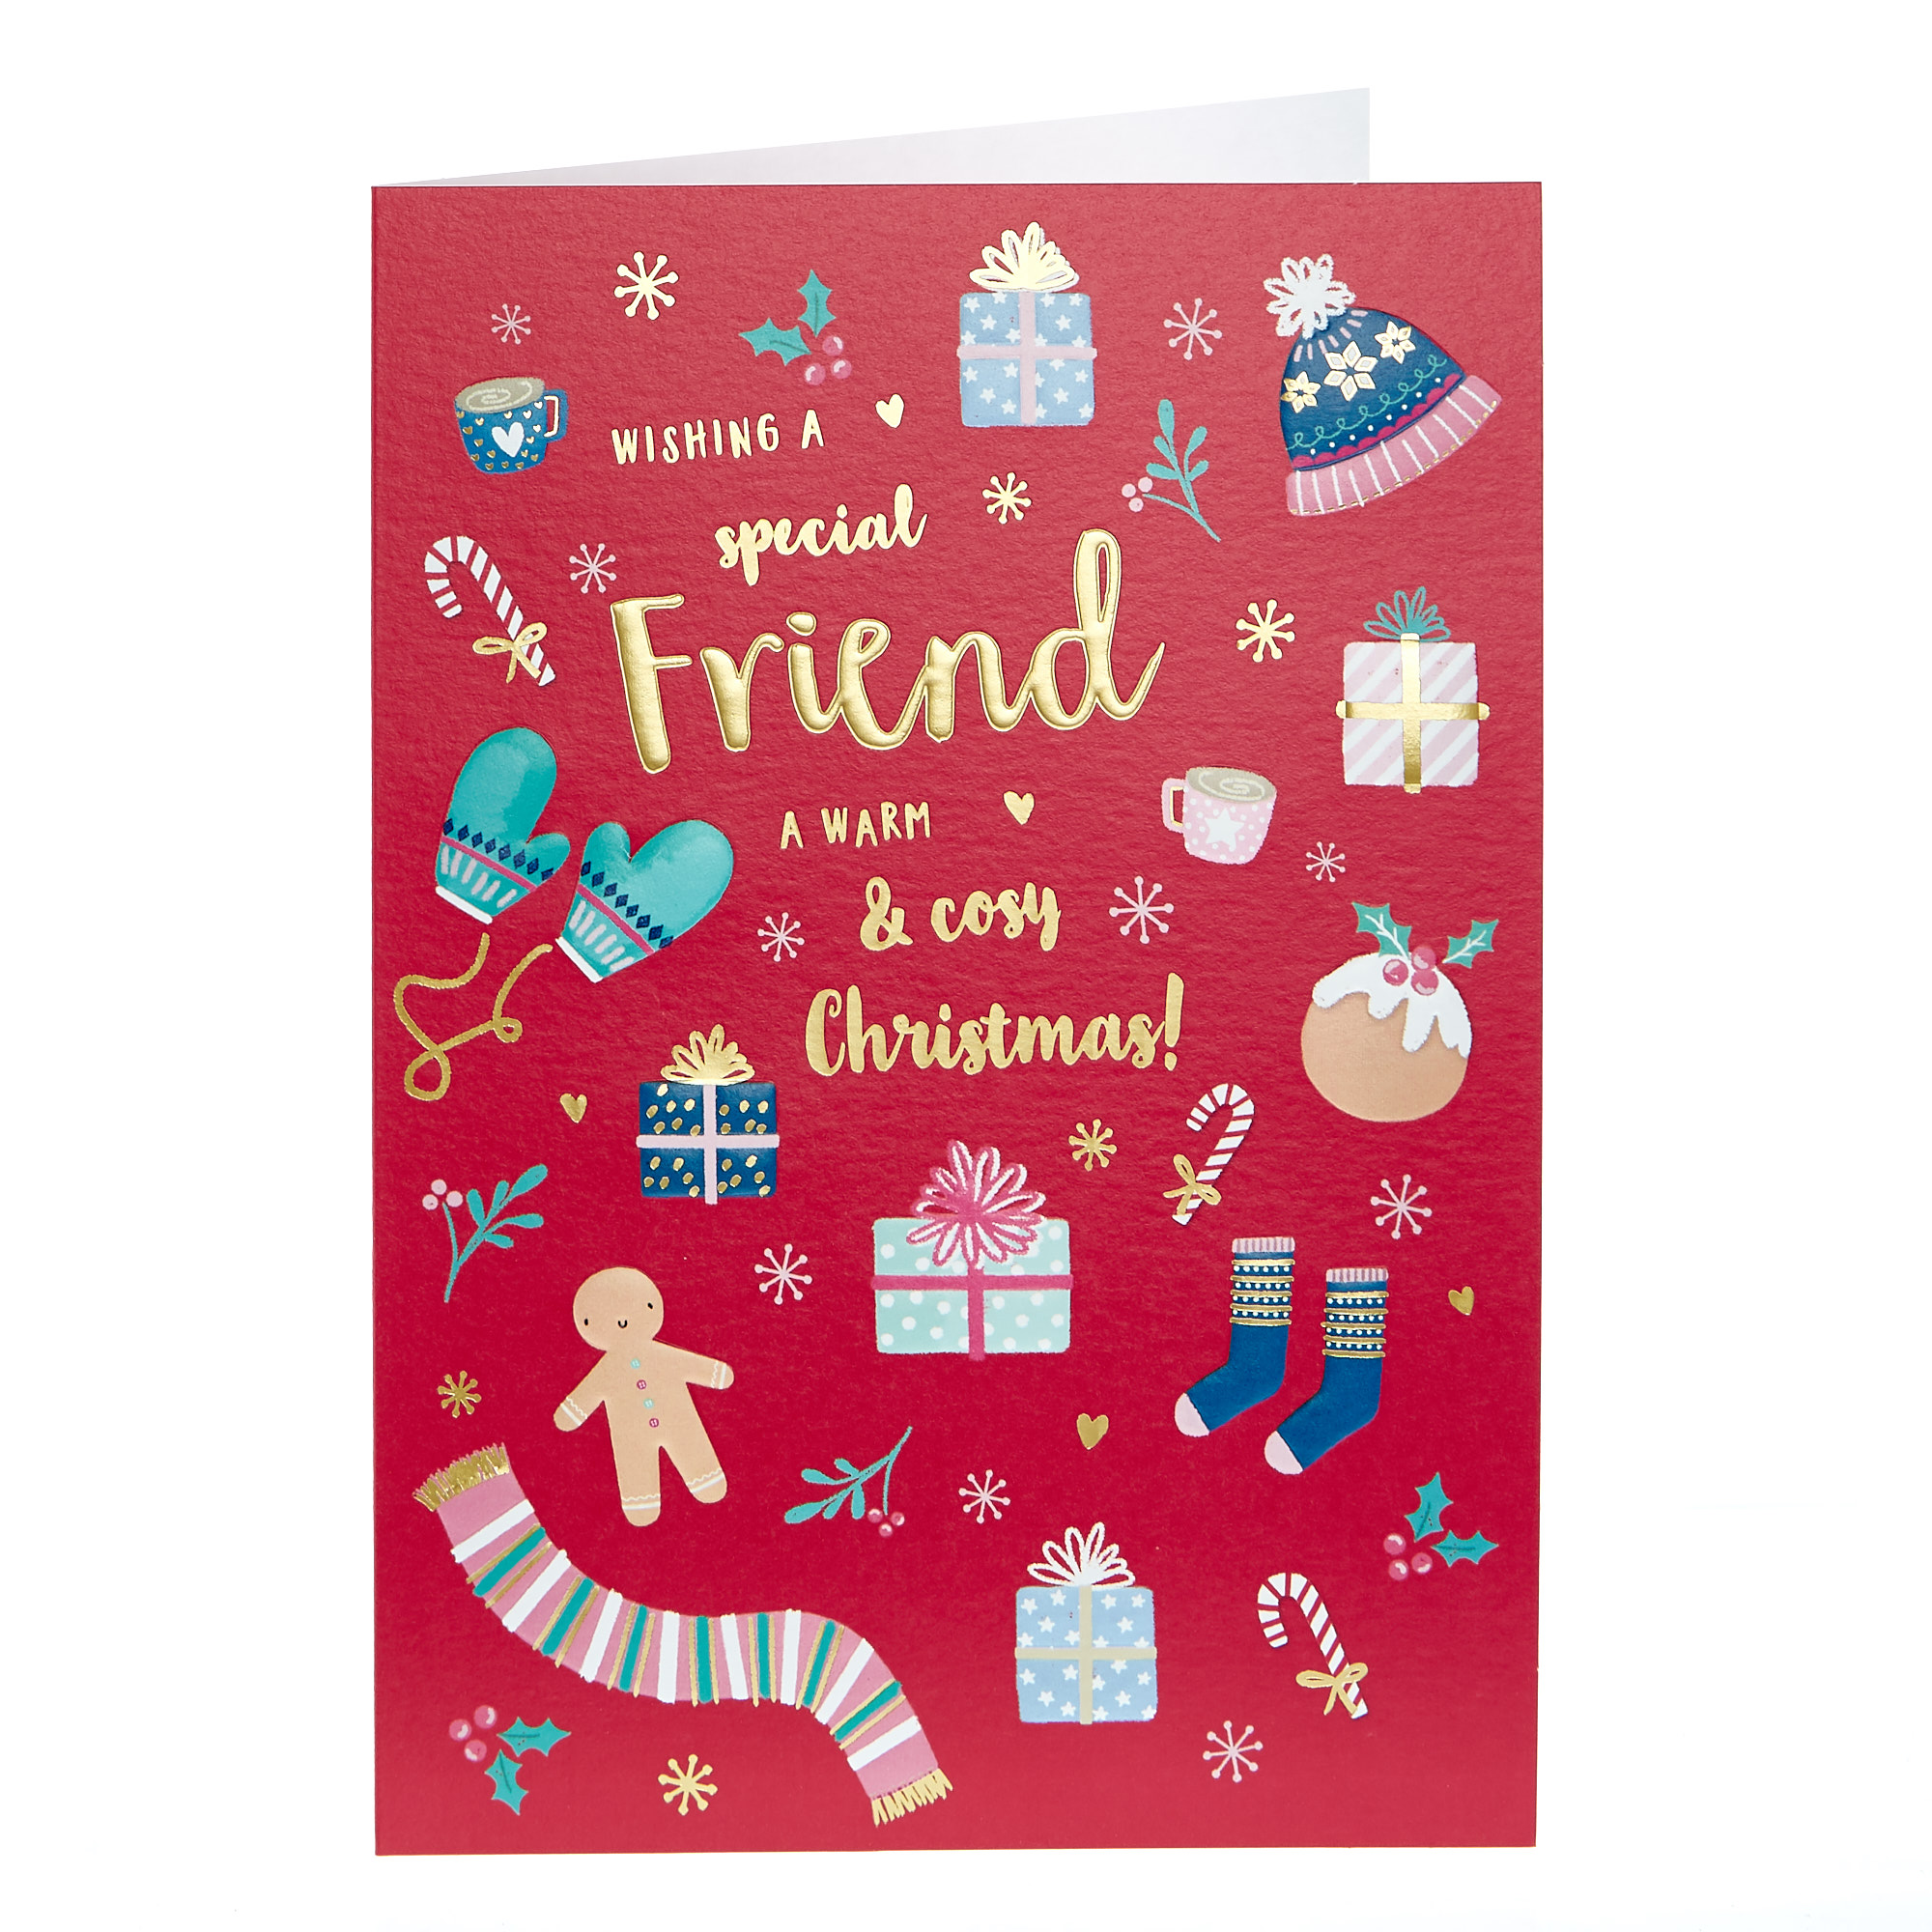 Christmas Card - Special Friend Warm & Cosy